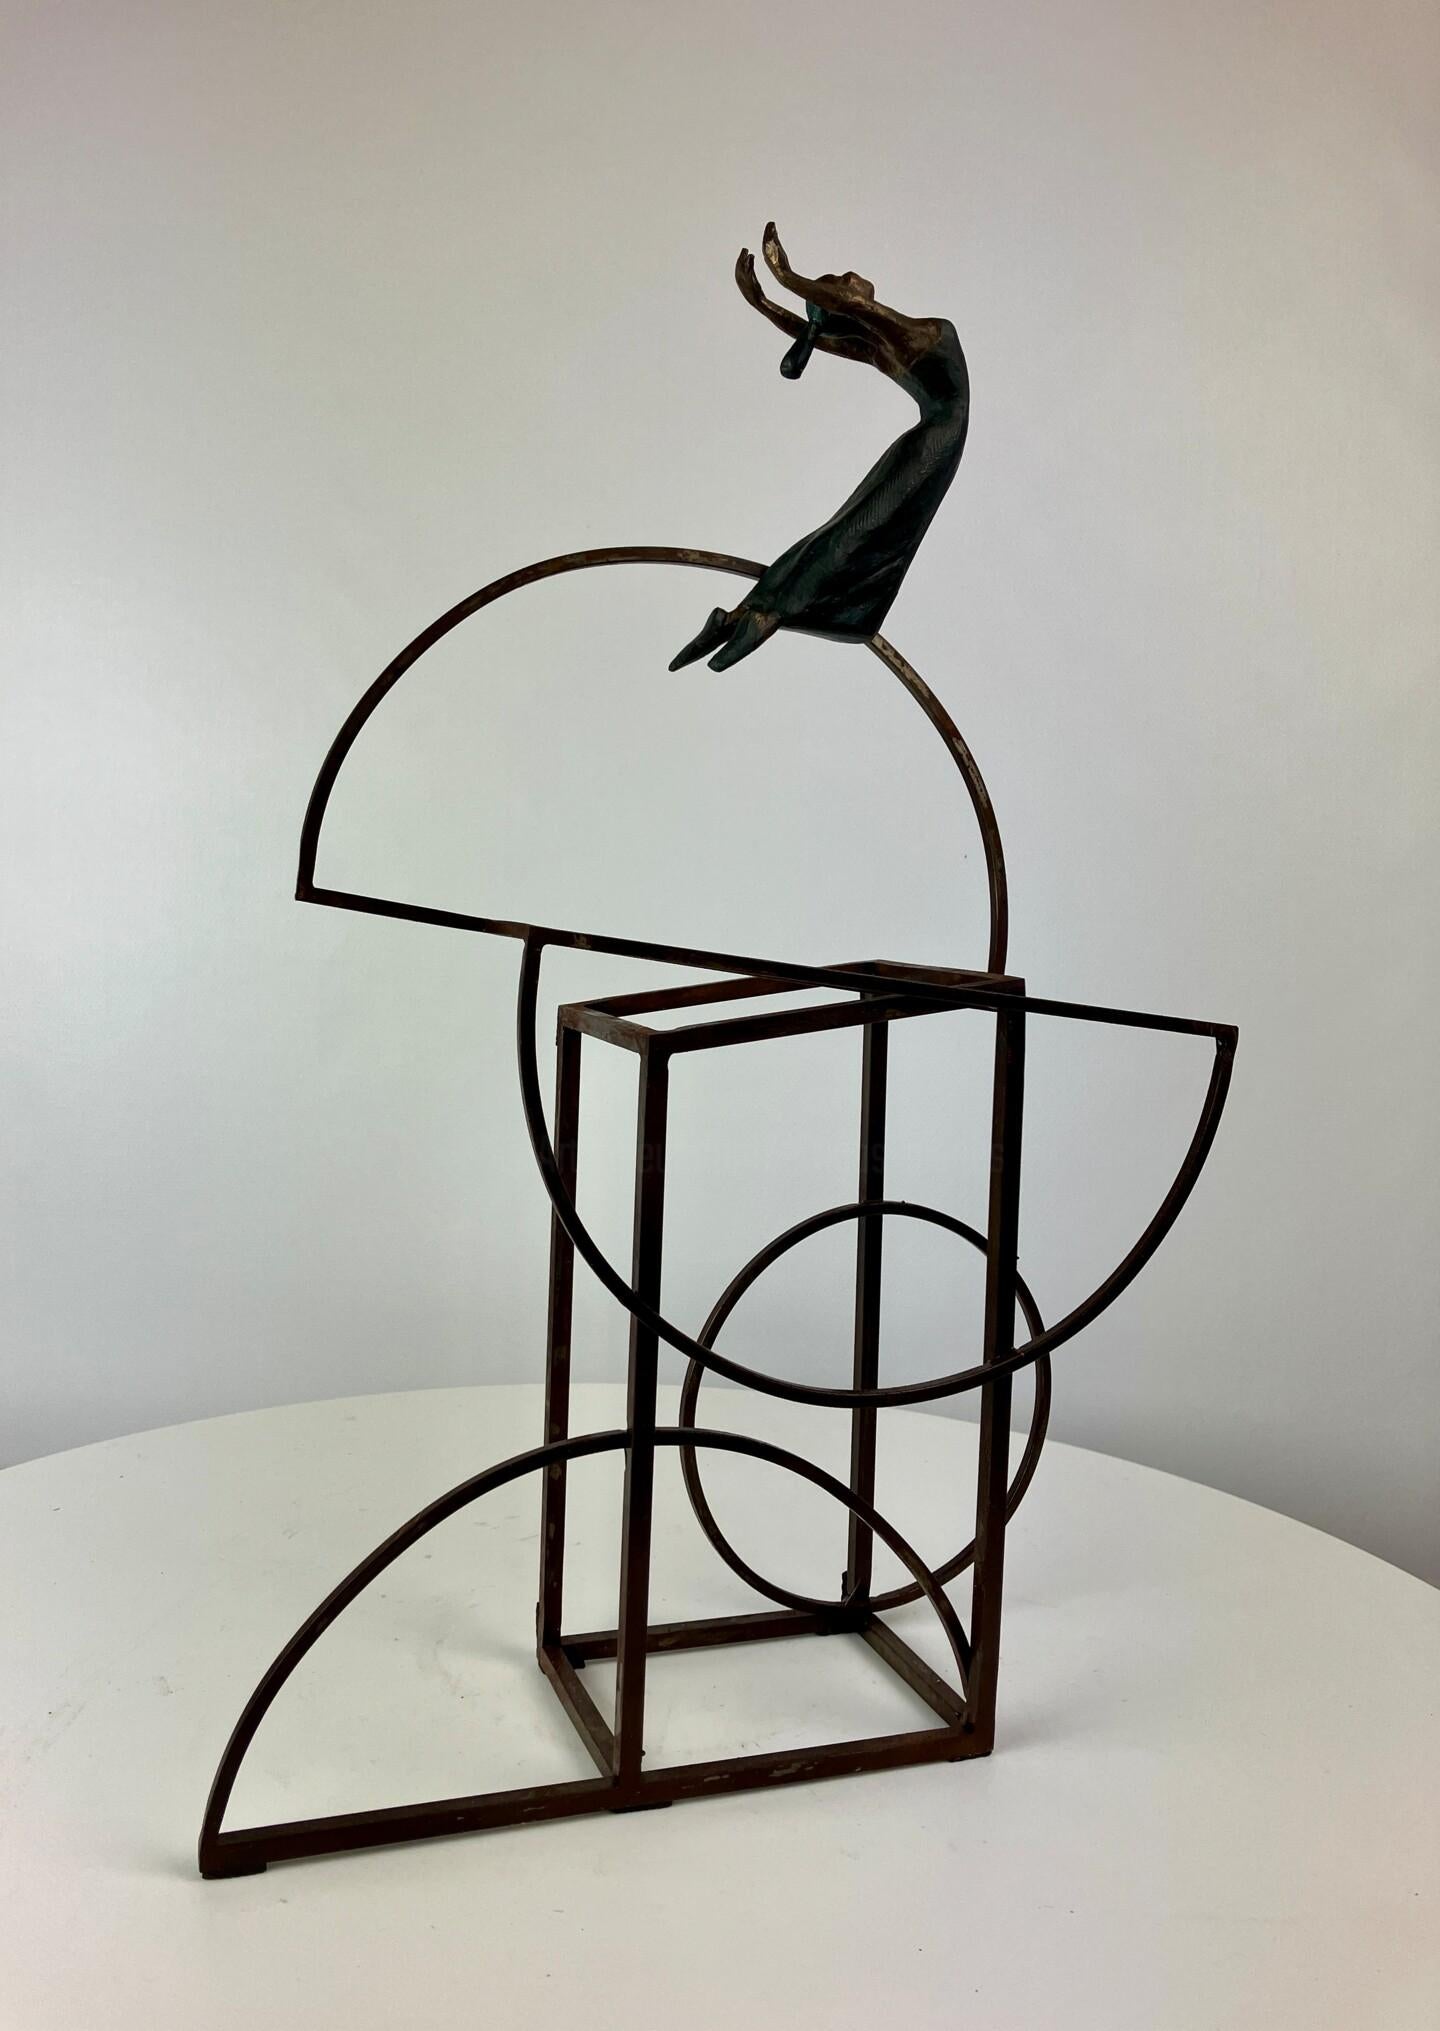 Bauhus II is a bronze sculpture with black patina, it is connected to a steel base. The edition size is 25. This sculpture stands on shelf as well as be hung on wall. Joan wants to depict the sense of freedom and free will by capturing the flying